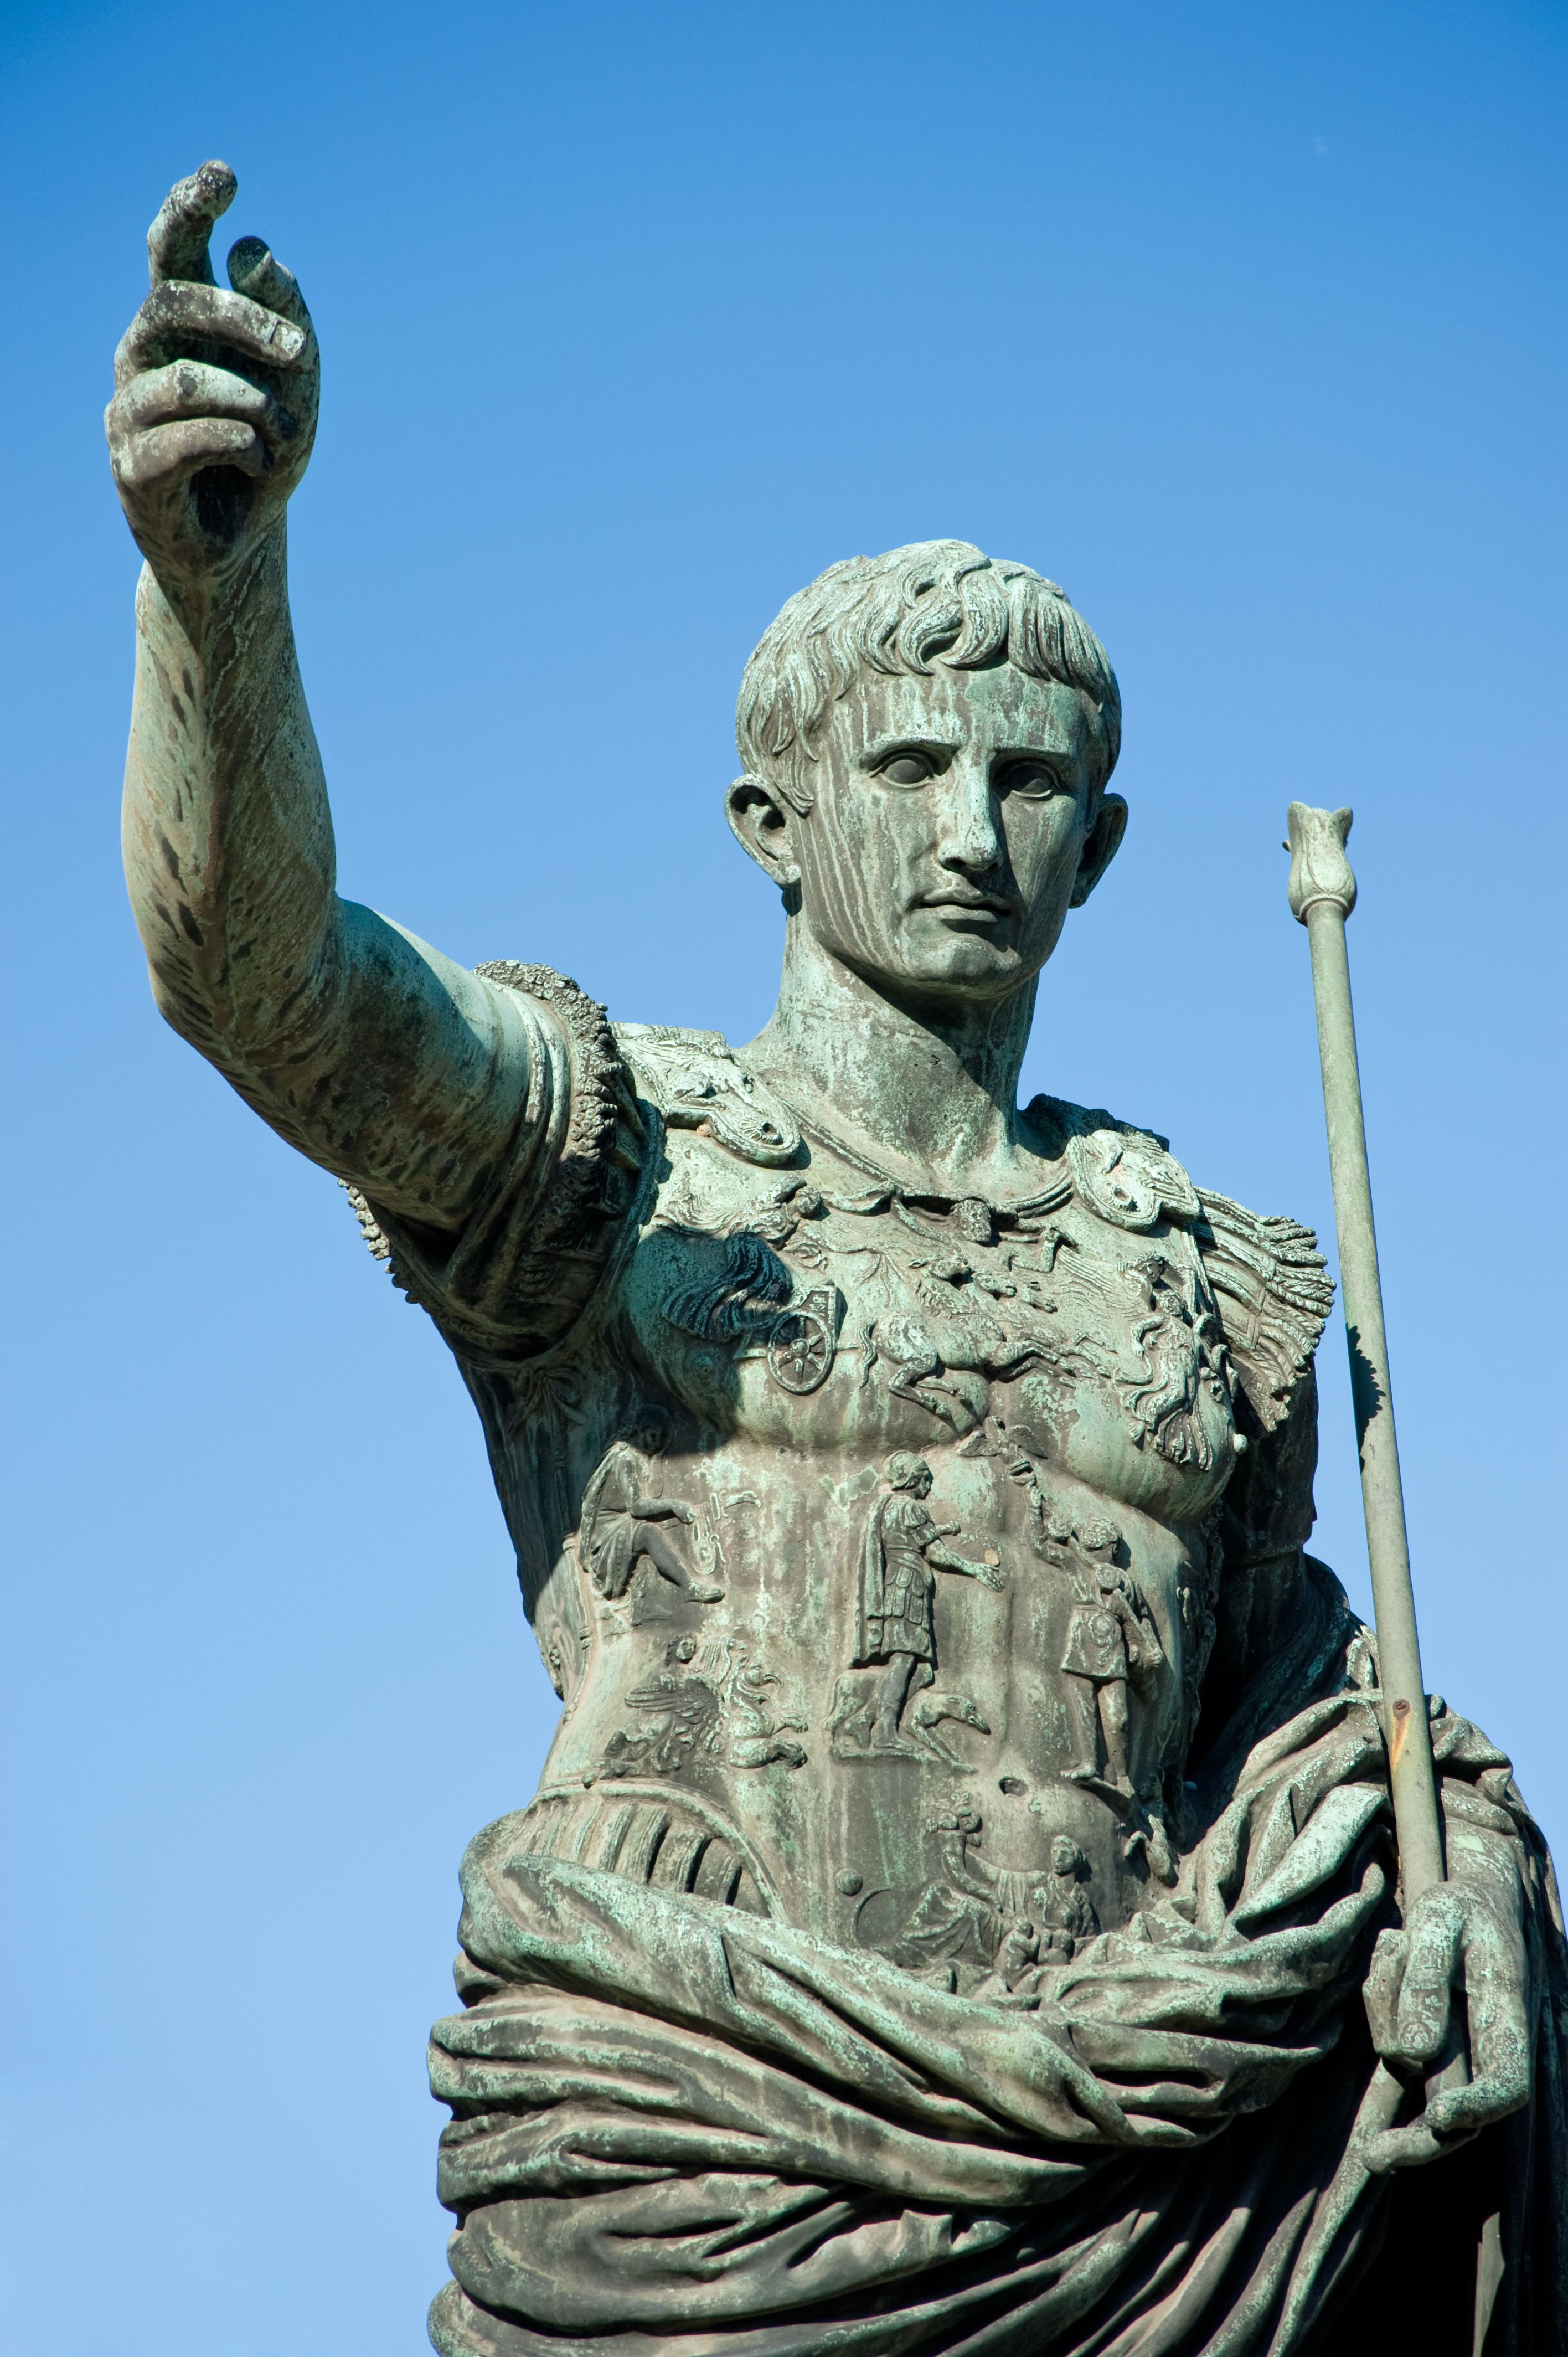 What Were Roman Emperors?